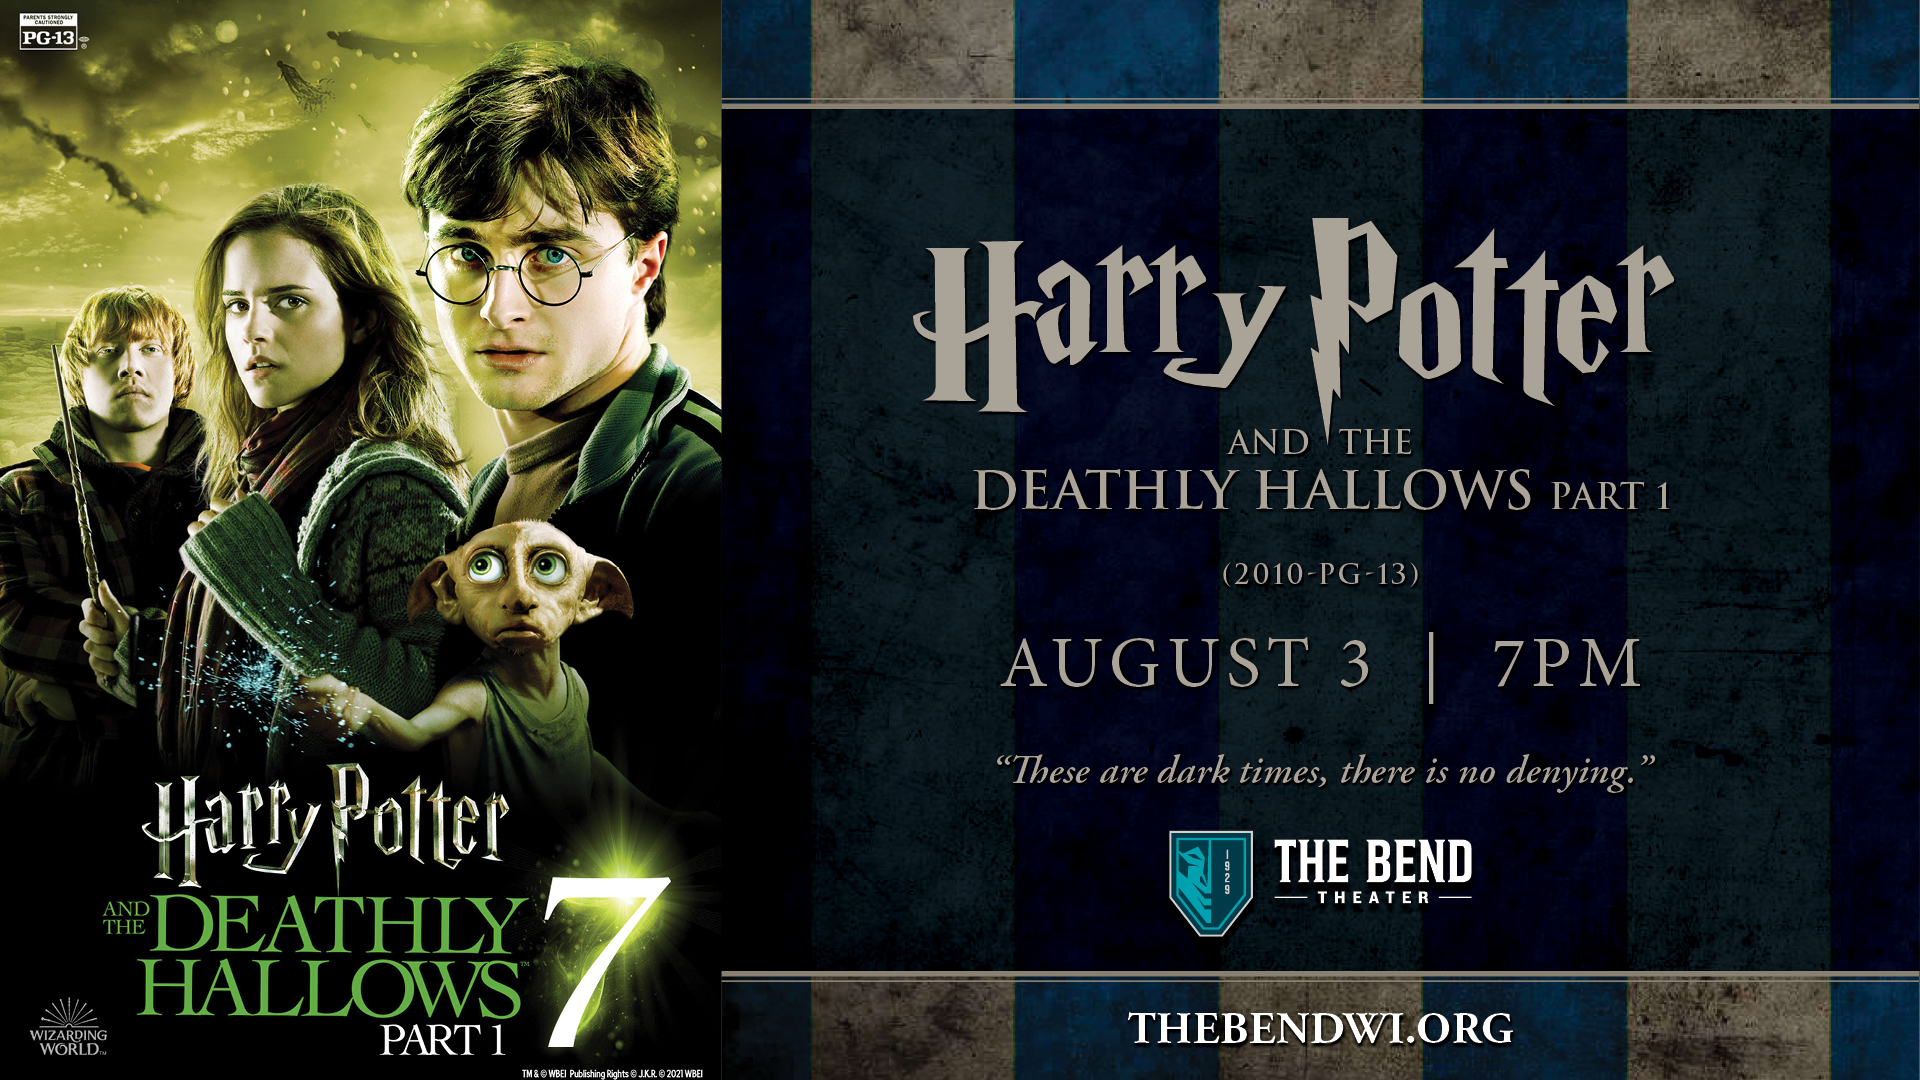 Wizarding World Nights at The Bend Theater: Harry Potter and The Deathly Hallows - Part 1 (2010 - PG-13)